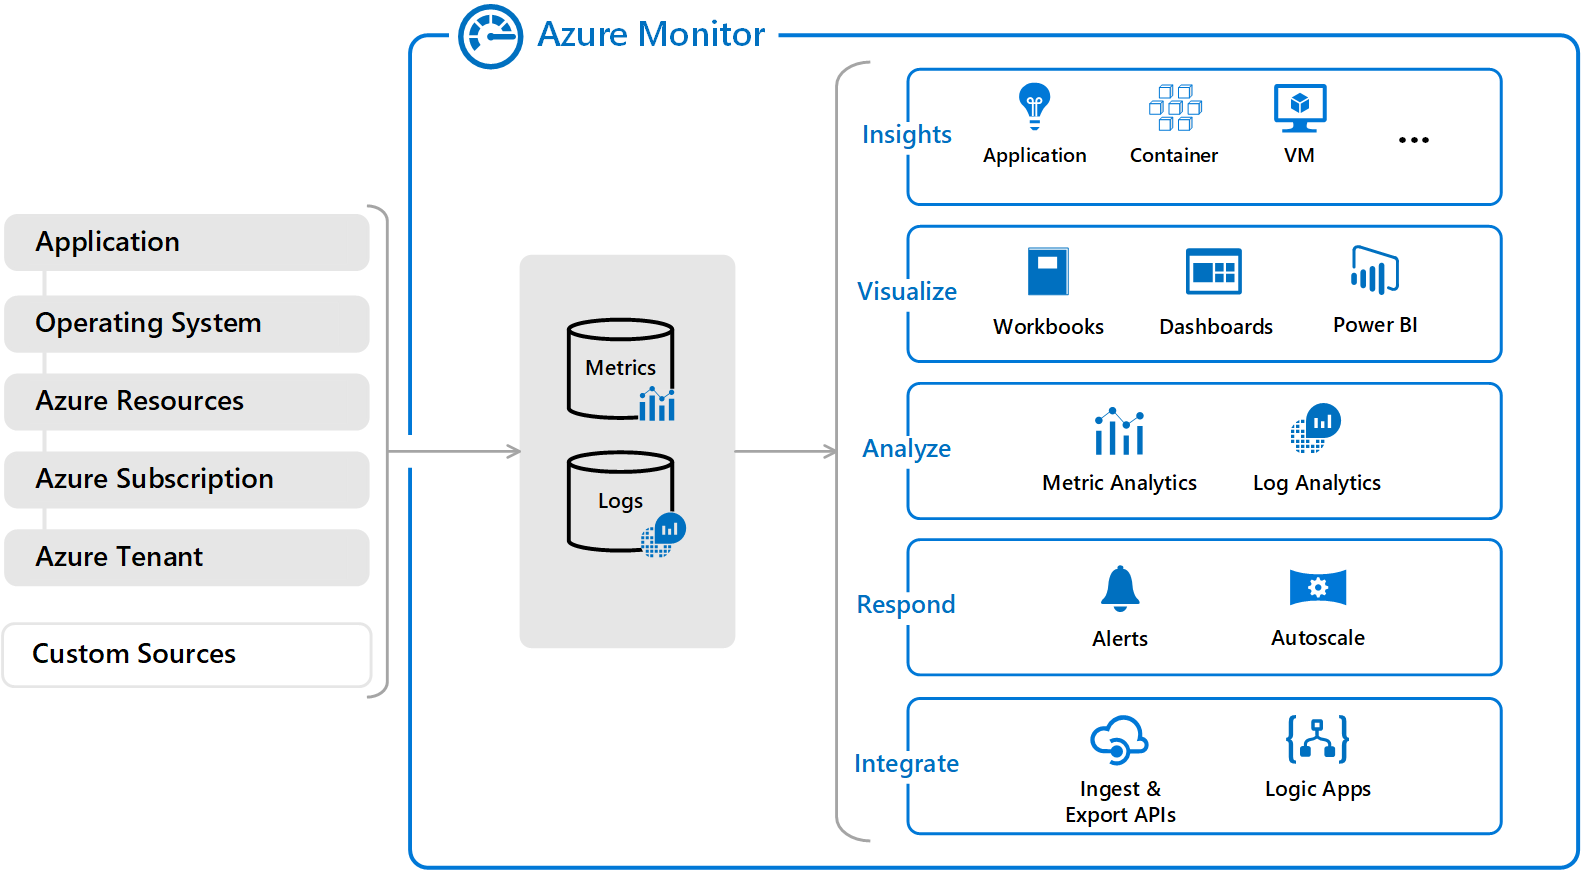 Azure Monitor overview